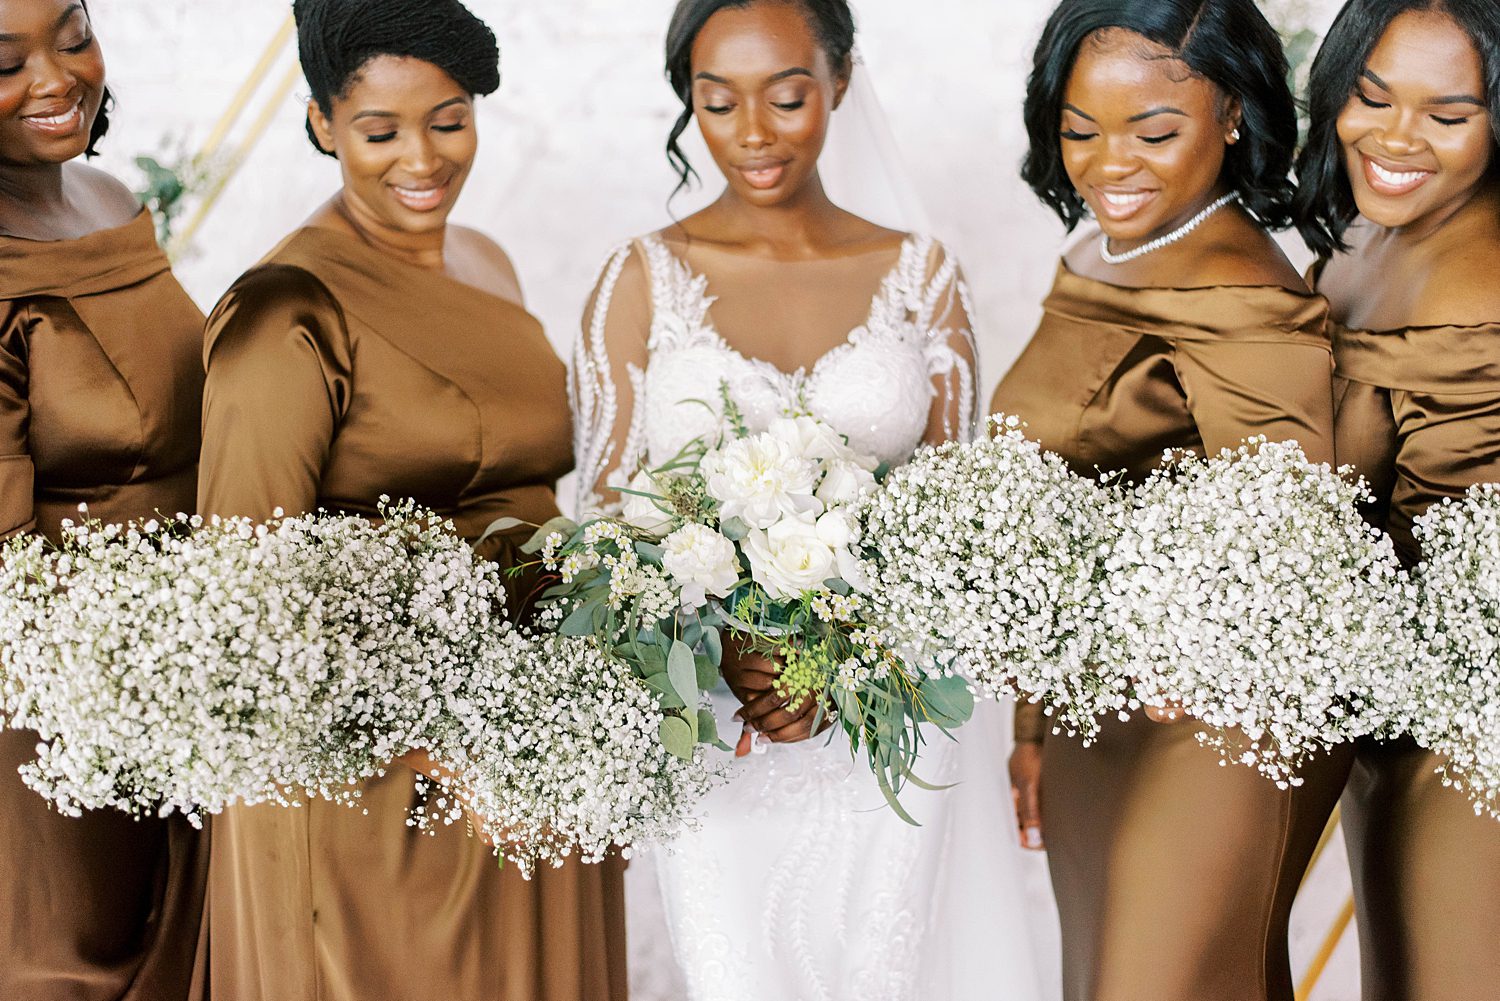 bride holds bouquet of white flowers with bridesmaids holding baby's breath